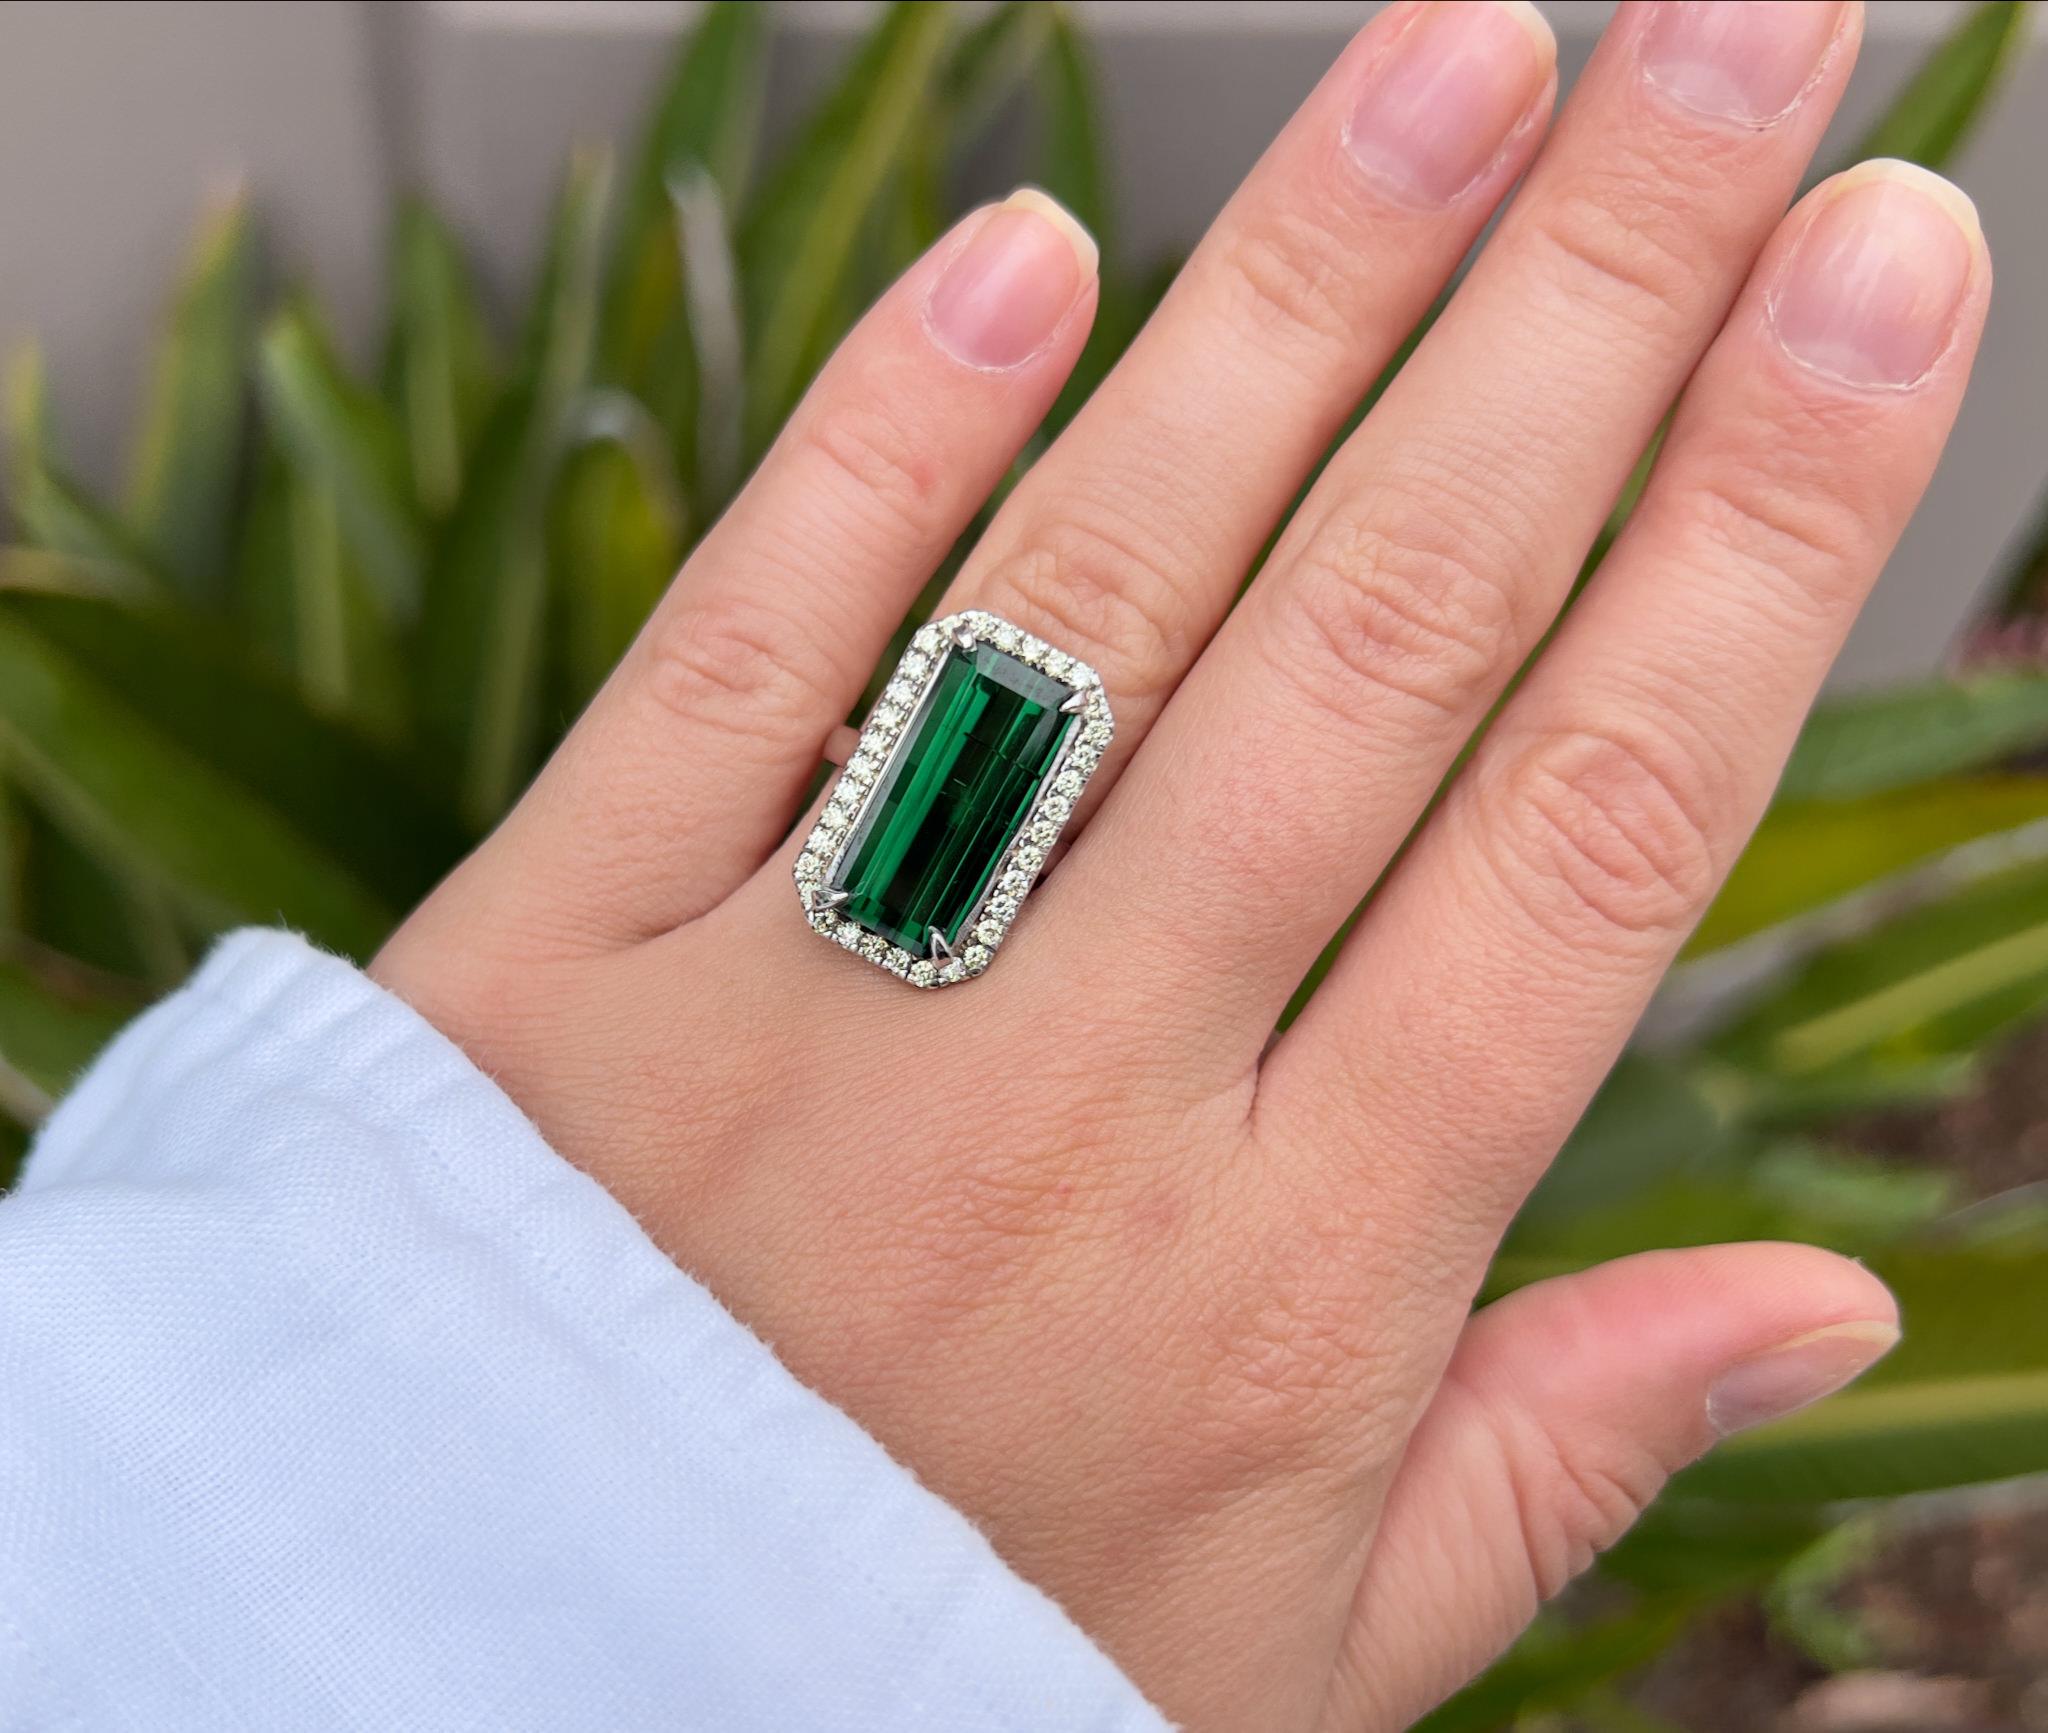 Green Tourmaline = 8+ Carat
Cut: Baguette
Diamonds = 0.60 Carats
( Color: F, Clarity: VS )
Metal: 18K Gold
*It can be resized complimentary